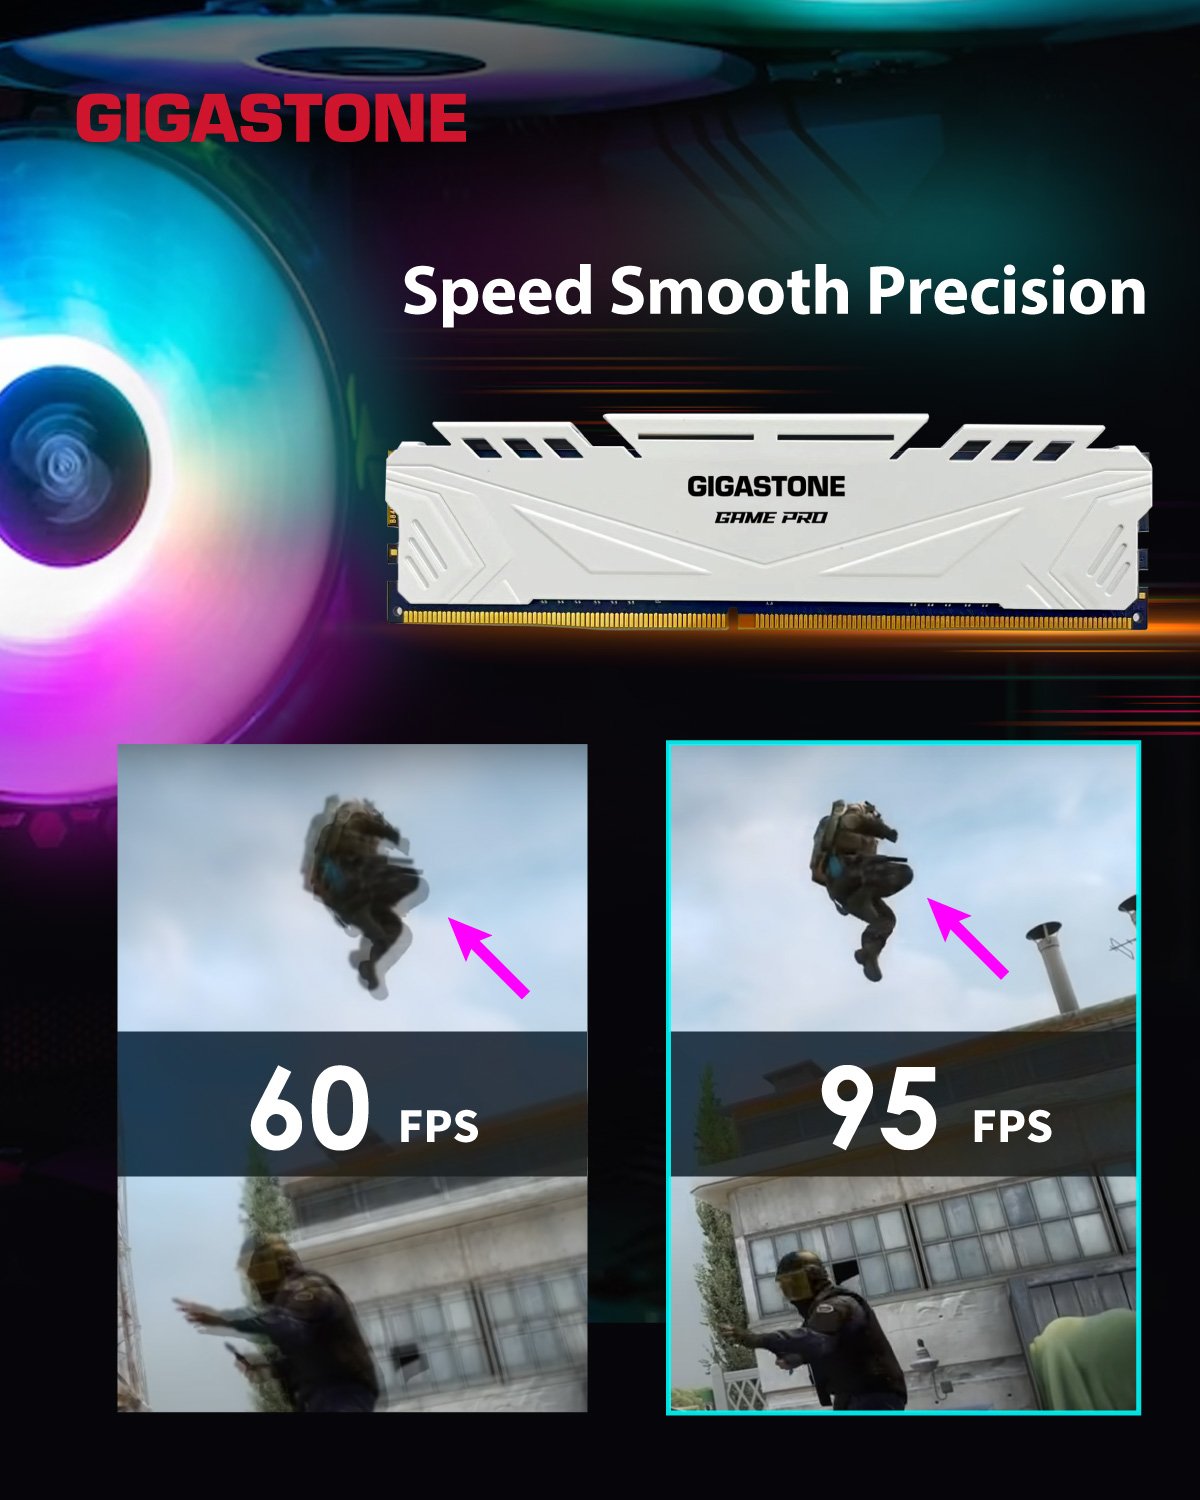 SPEED SMOOTH PRECISION